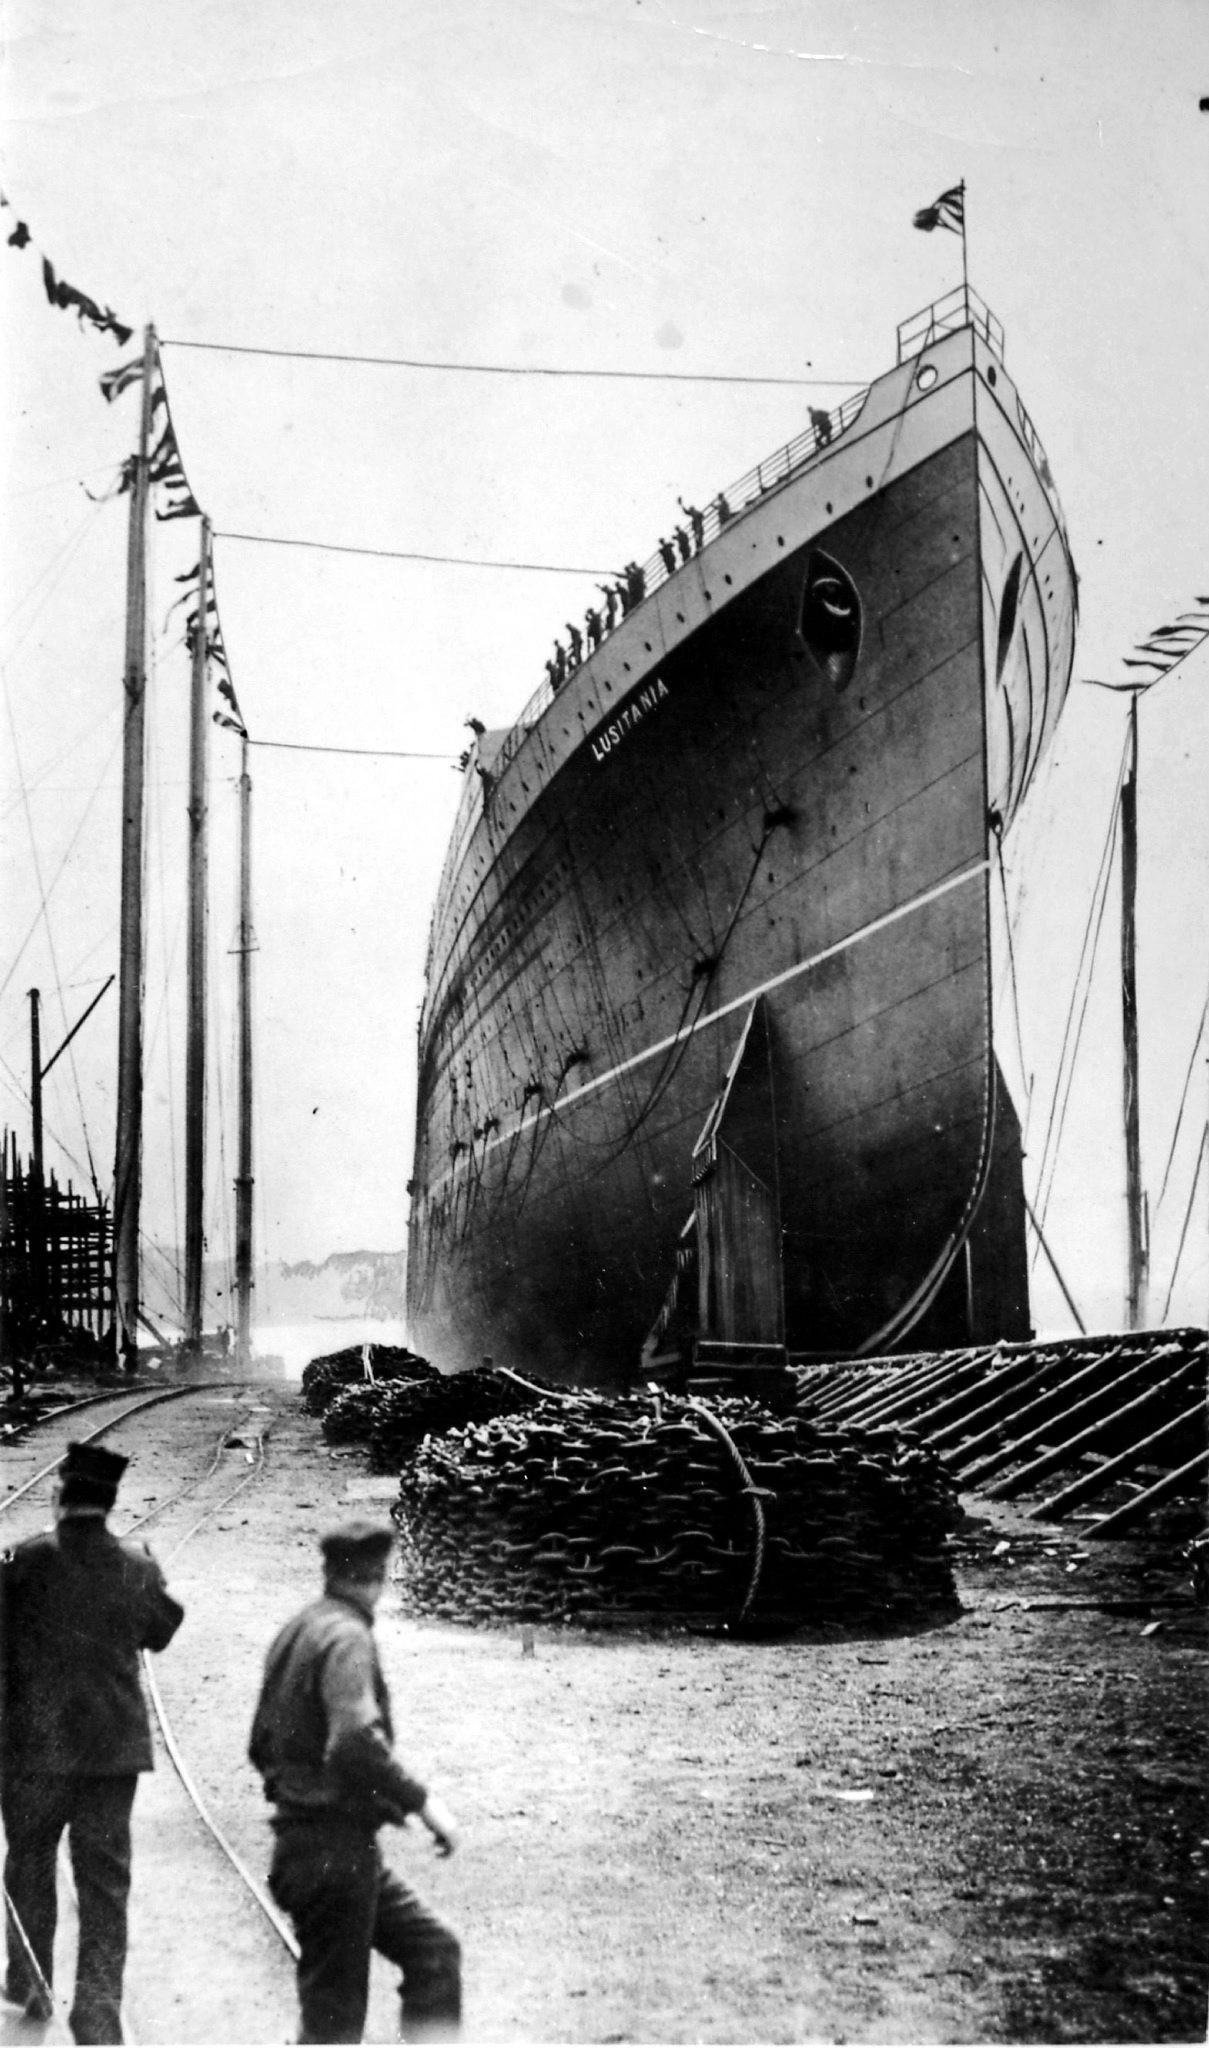 The launch of the Lusitania